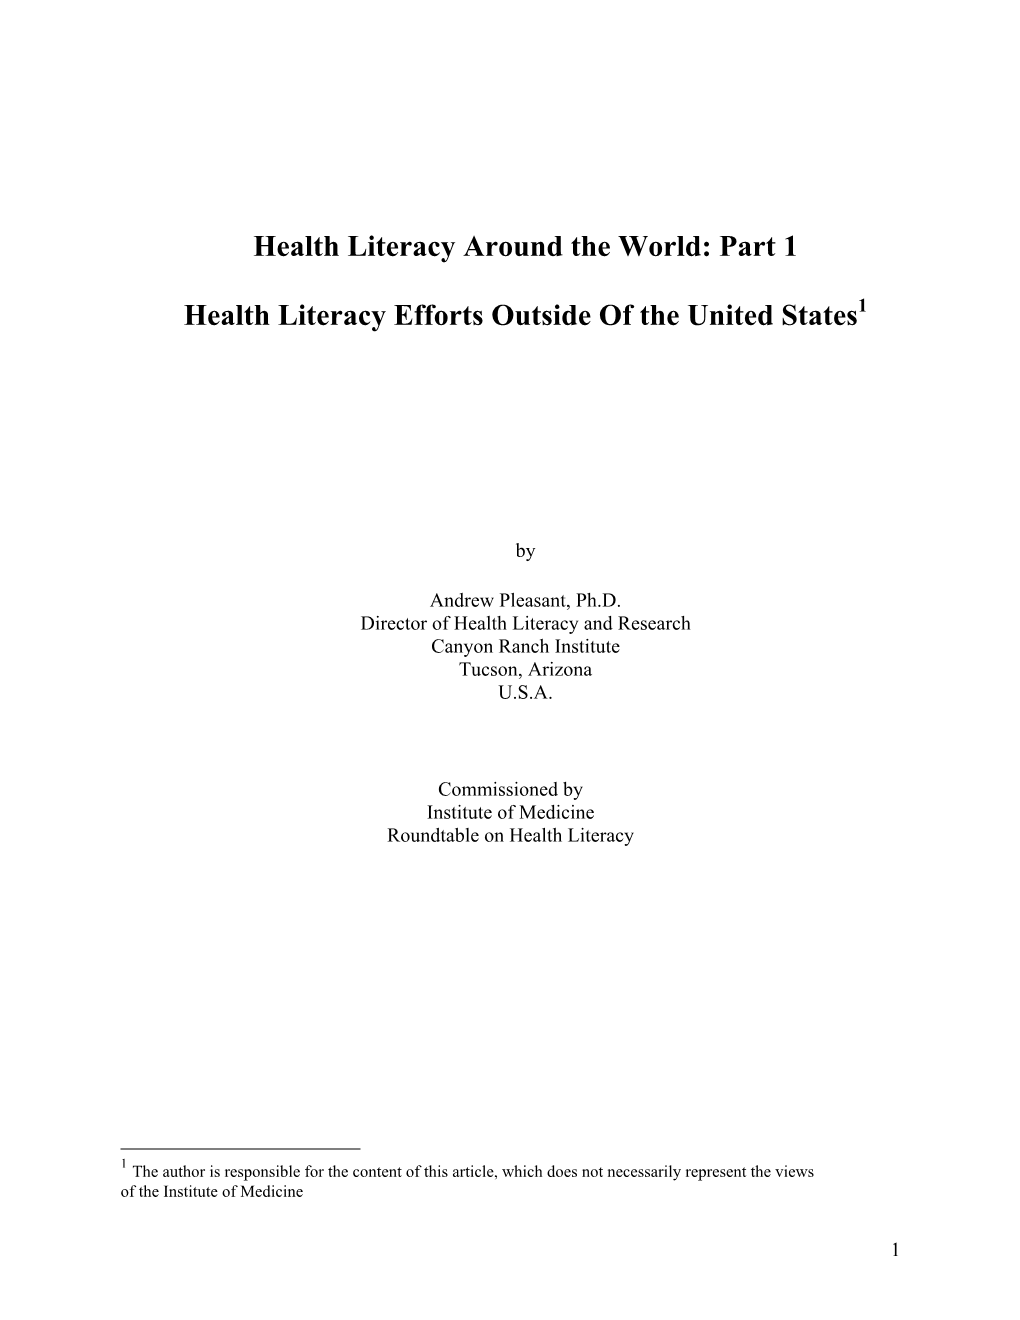 Health Literacy Around the World: Part 1 Health Literacy Efforts Outside Of